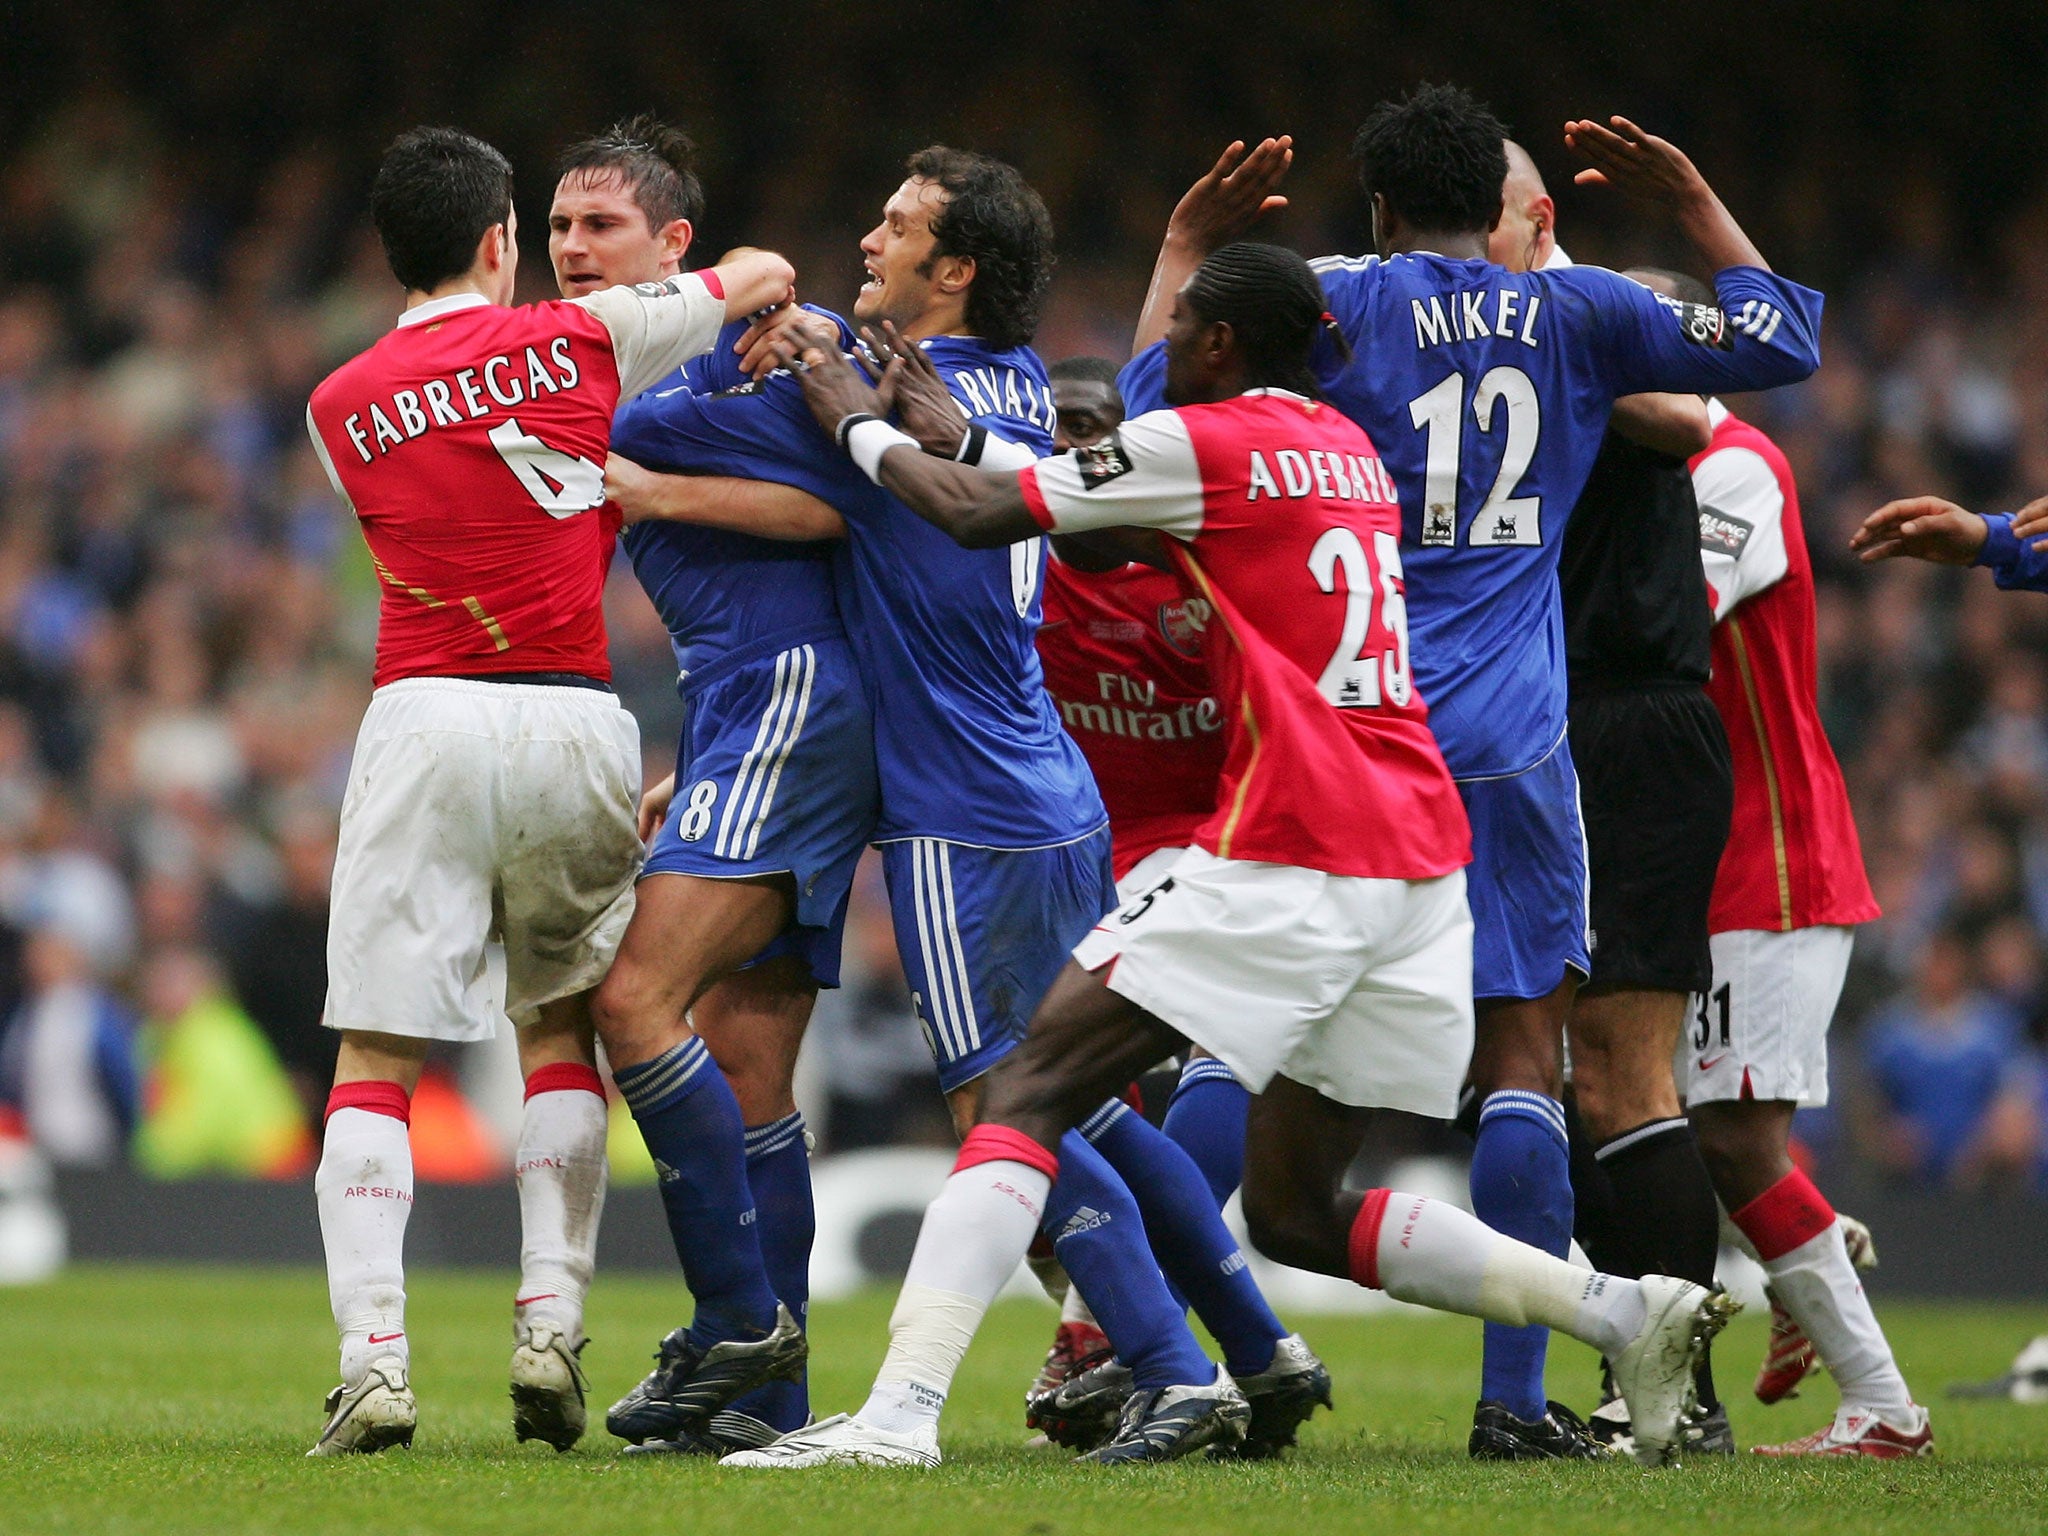 Arsenal vs Chelsea have often been fiery affairs